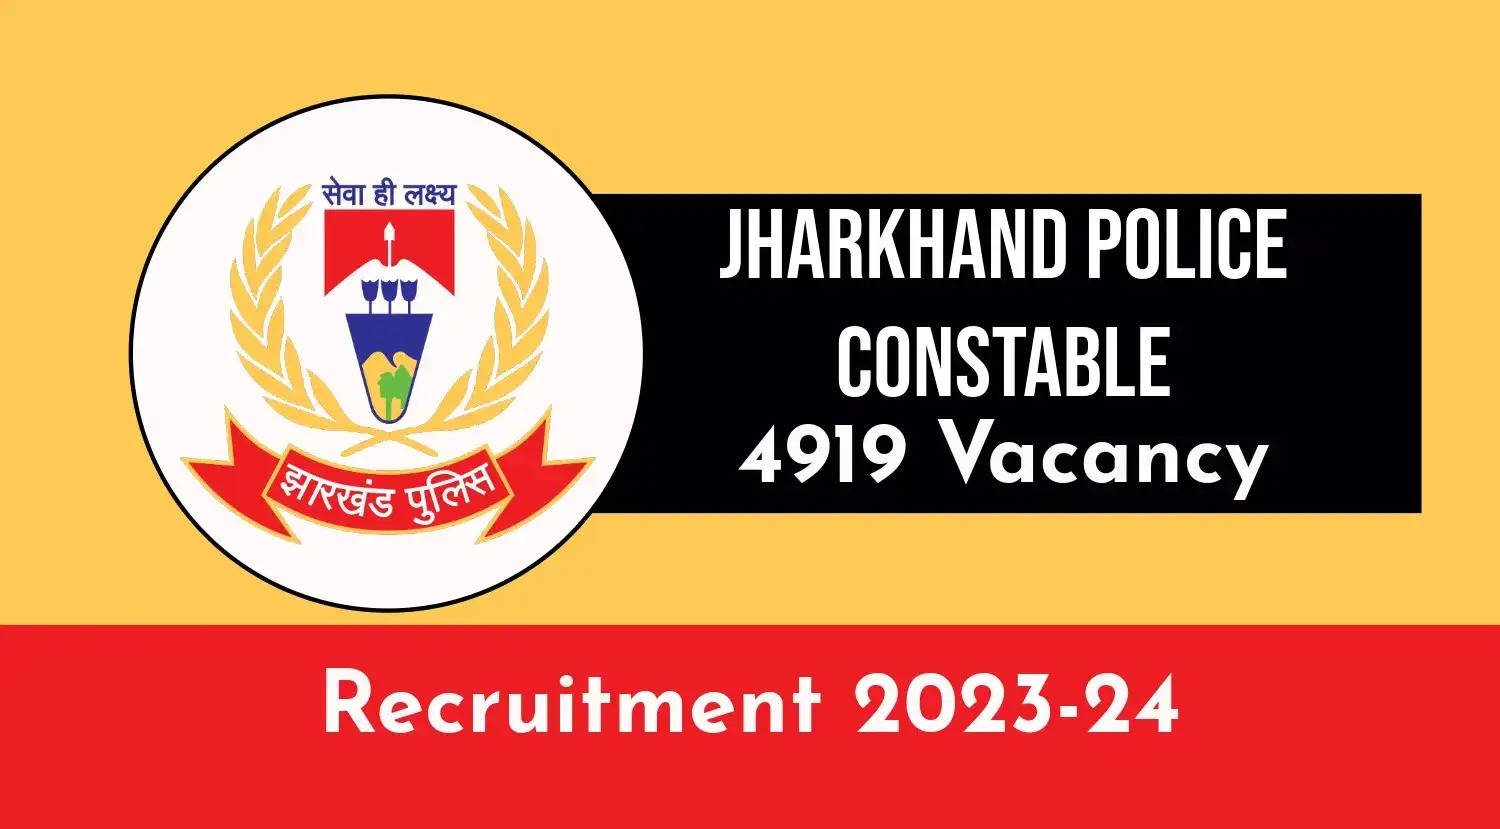 Jharkhand Police Constable Recruitment 2023-24 Open: Apply for 4919 Posts at jssc.nic.in